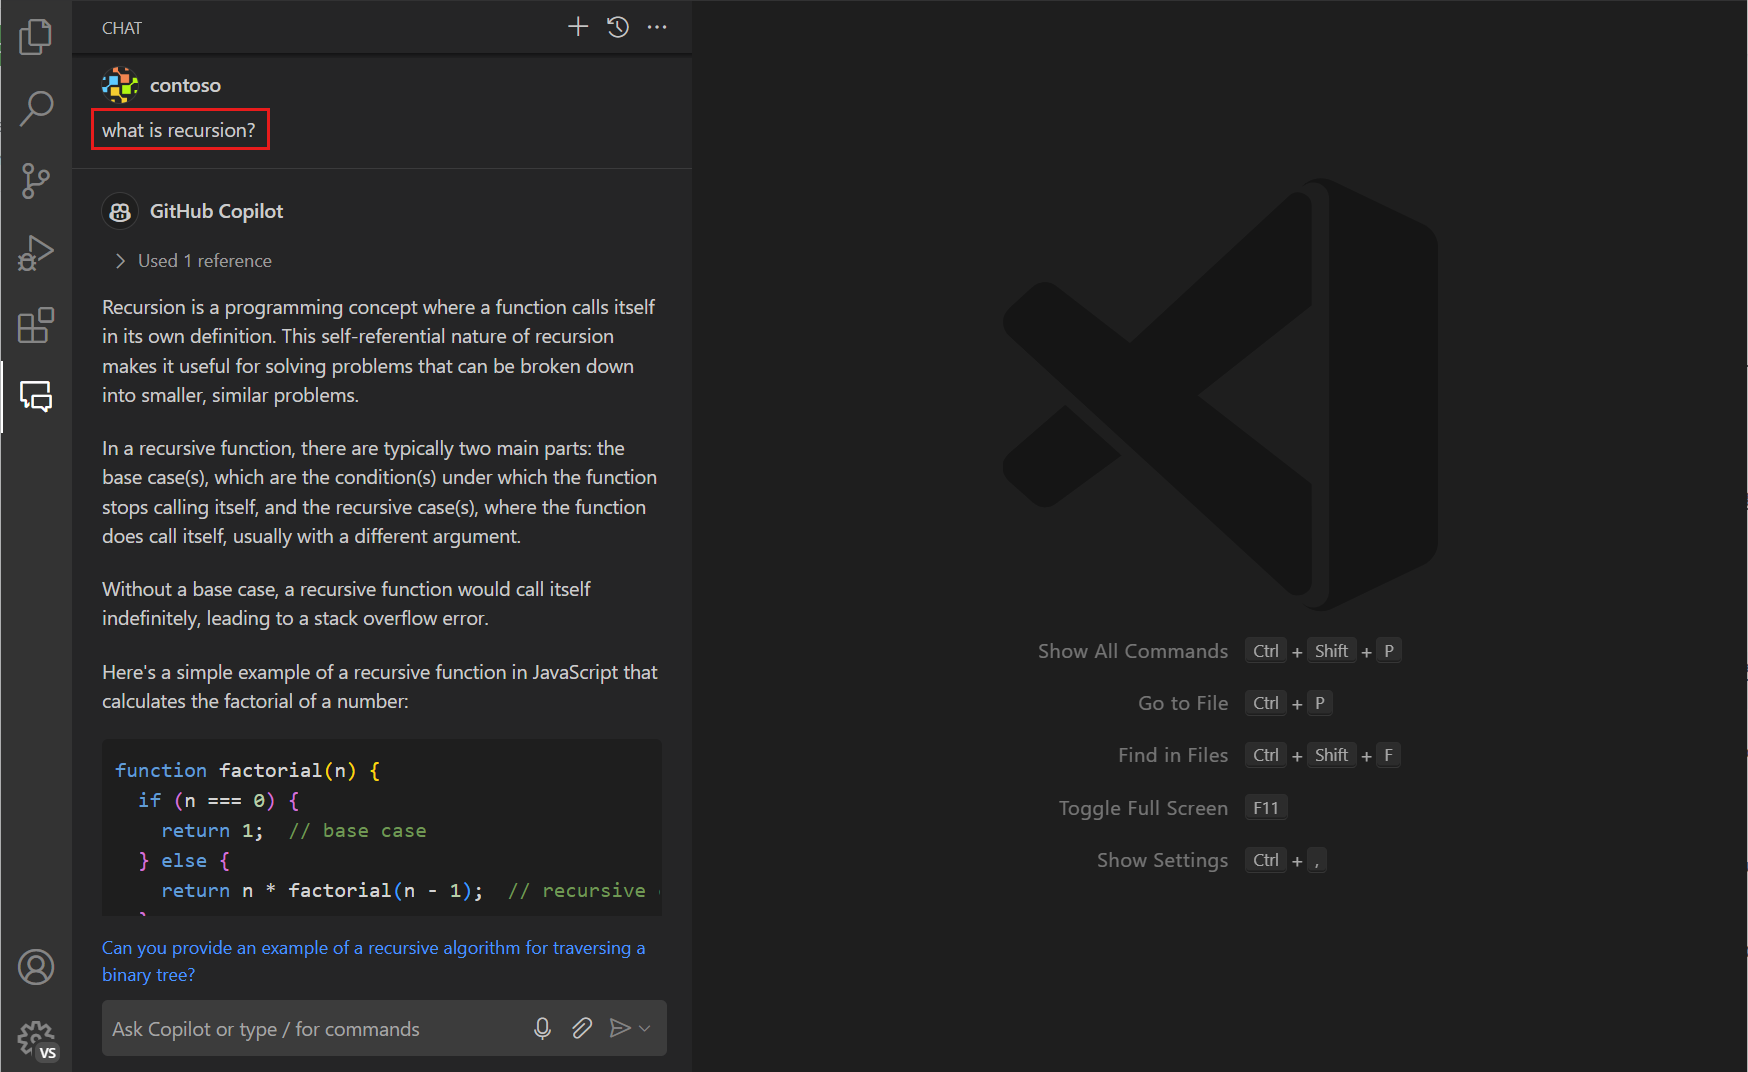 Screenshot of VS Code editor, showing the Copilot Chat view containing the answer to what recursion is. The result contains both text and a code block.